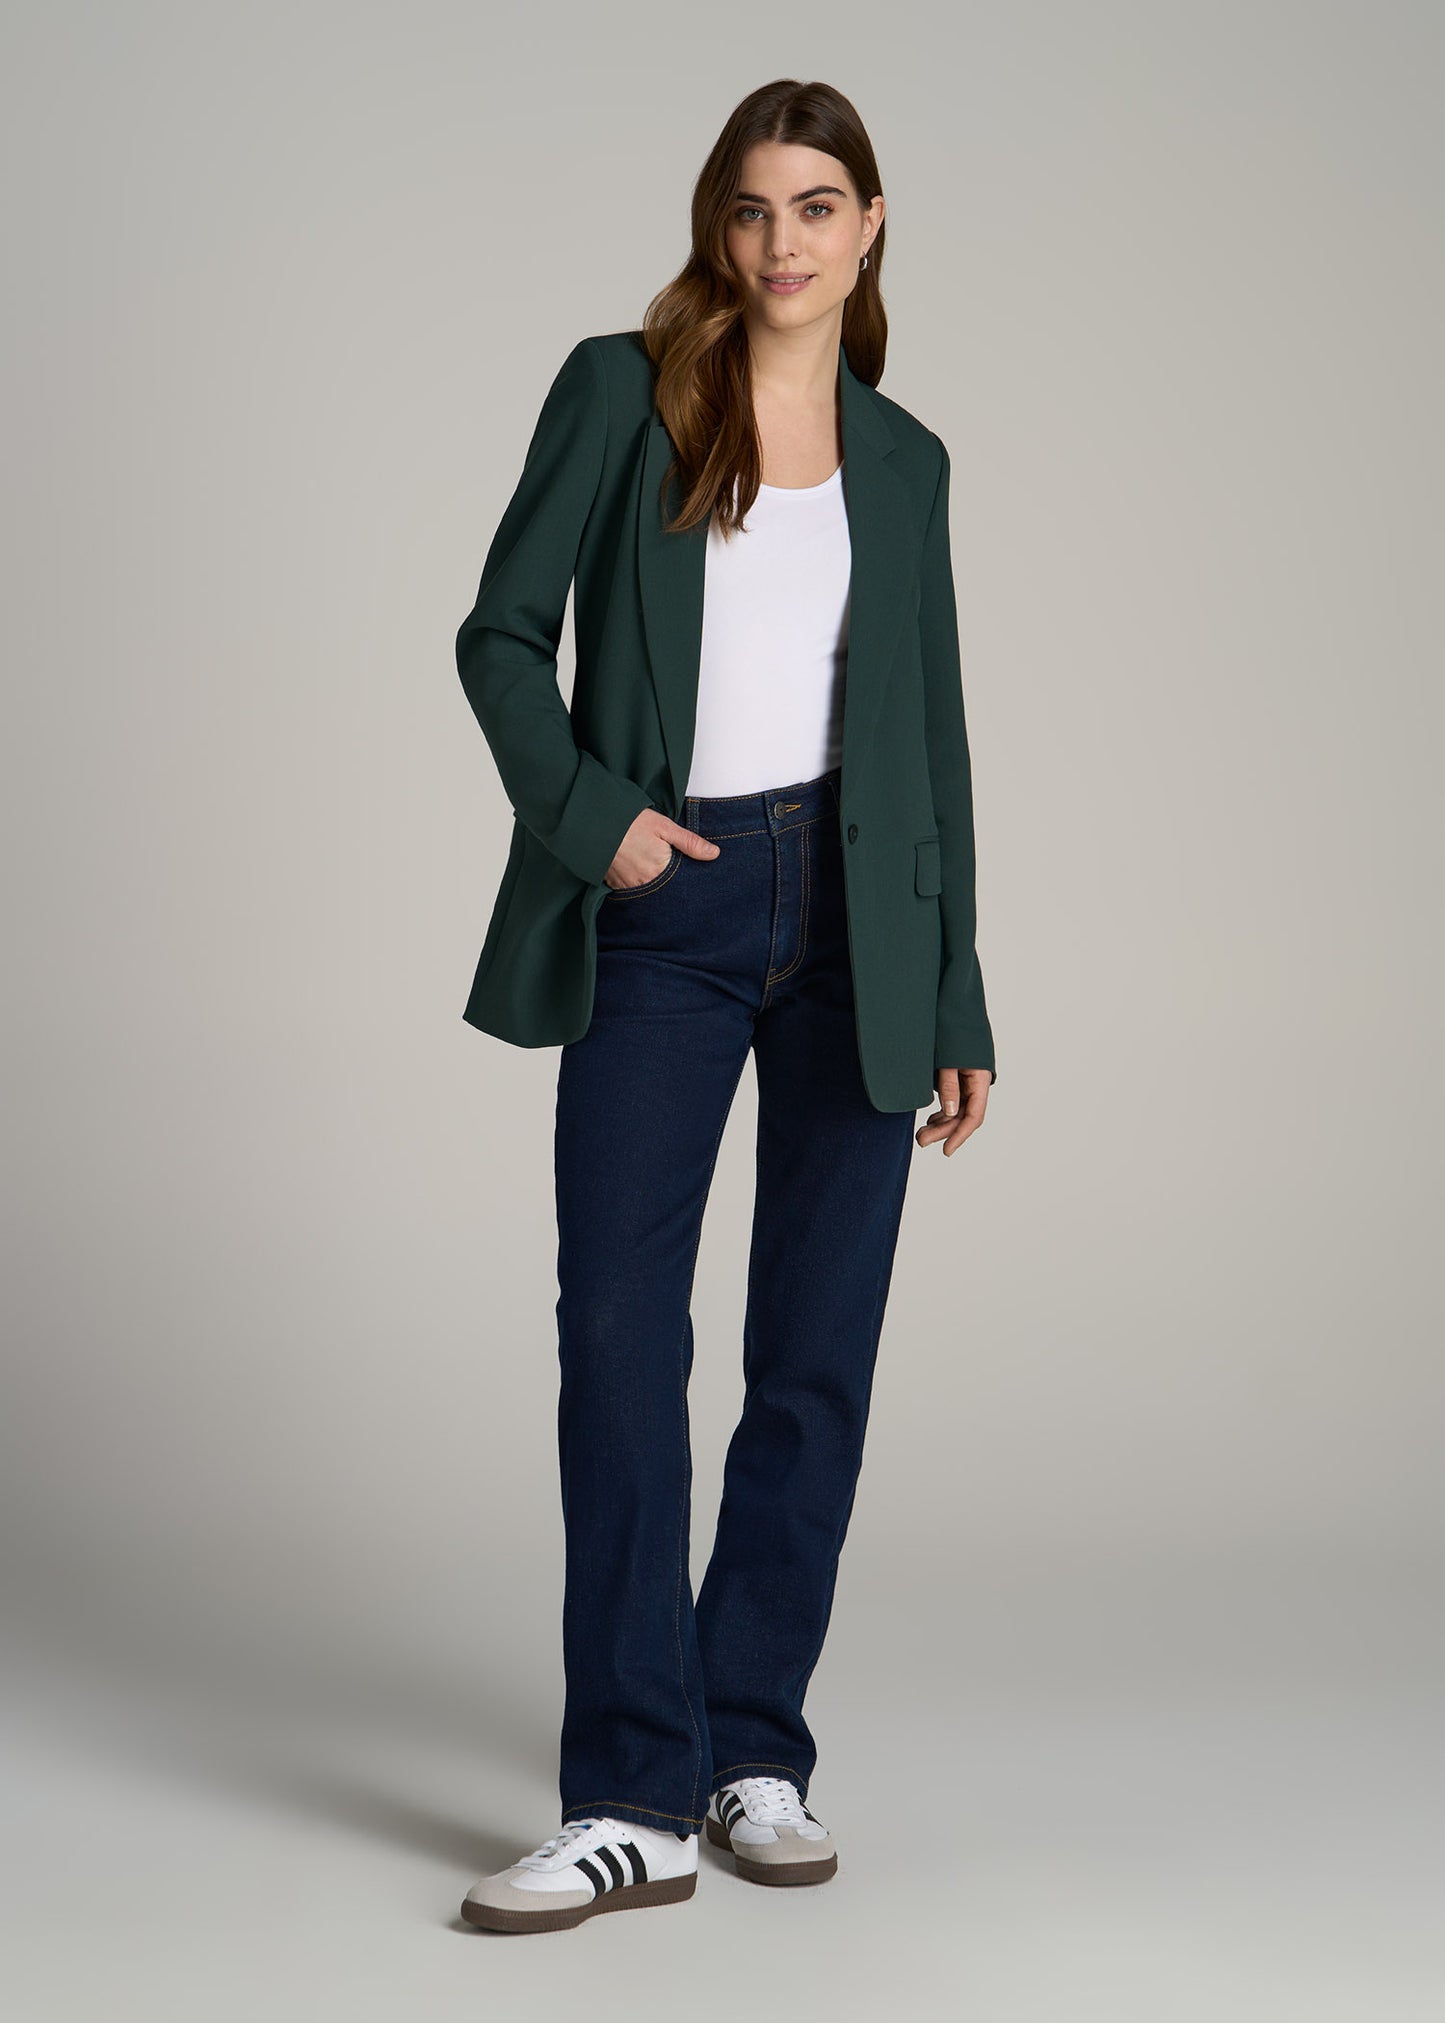 Relaxed Single-Button Tall Blazer for Women in Smoky Pine